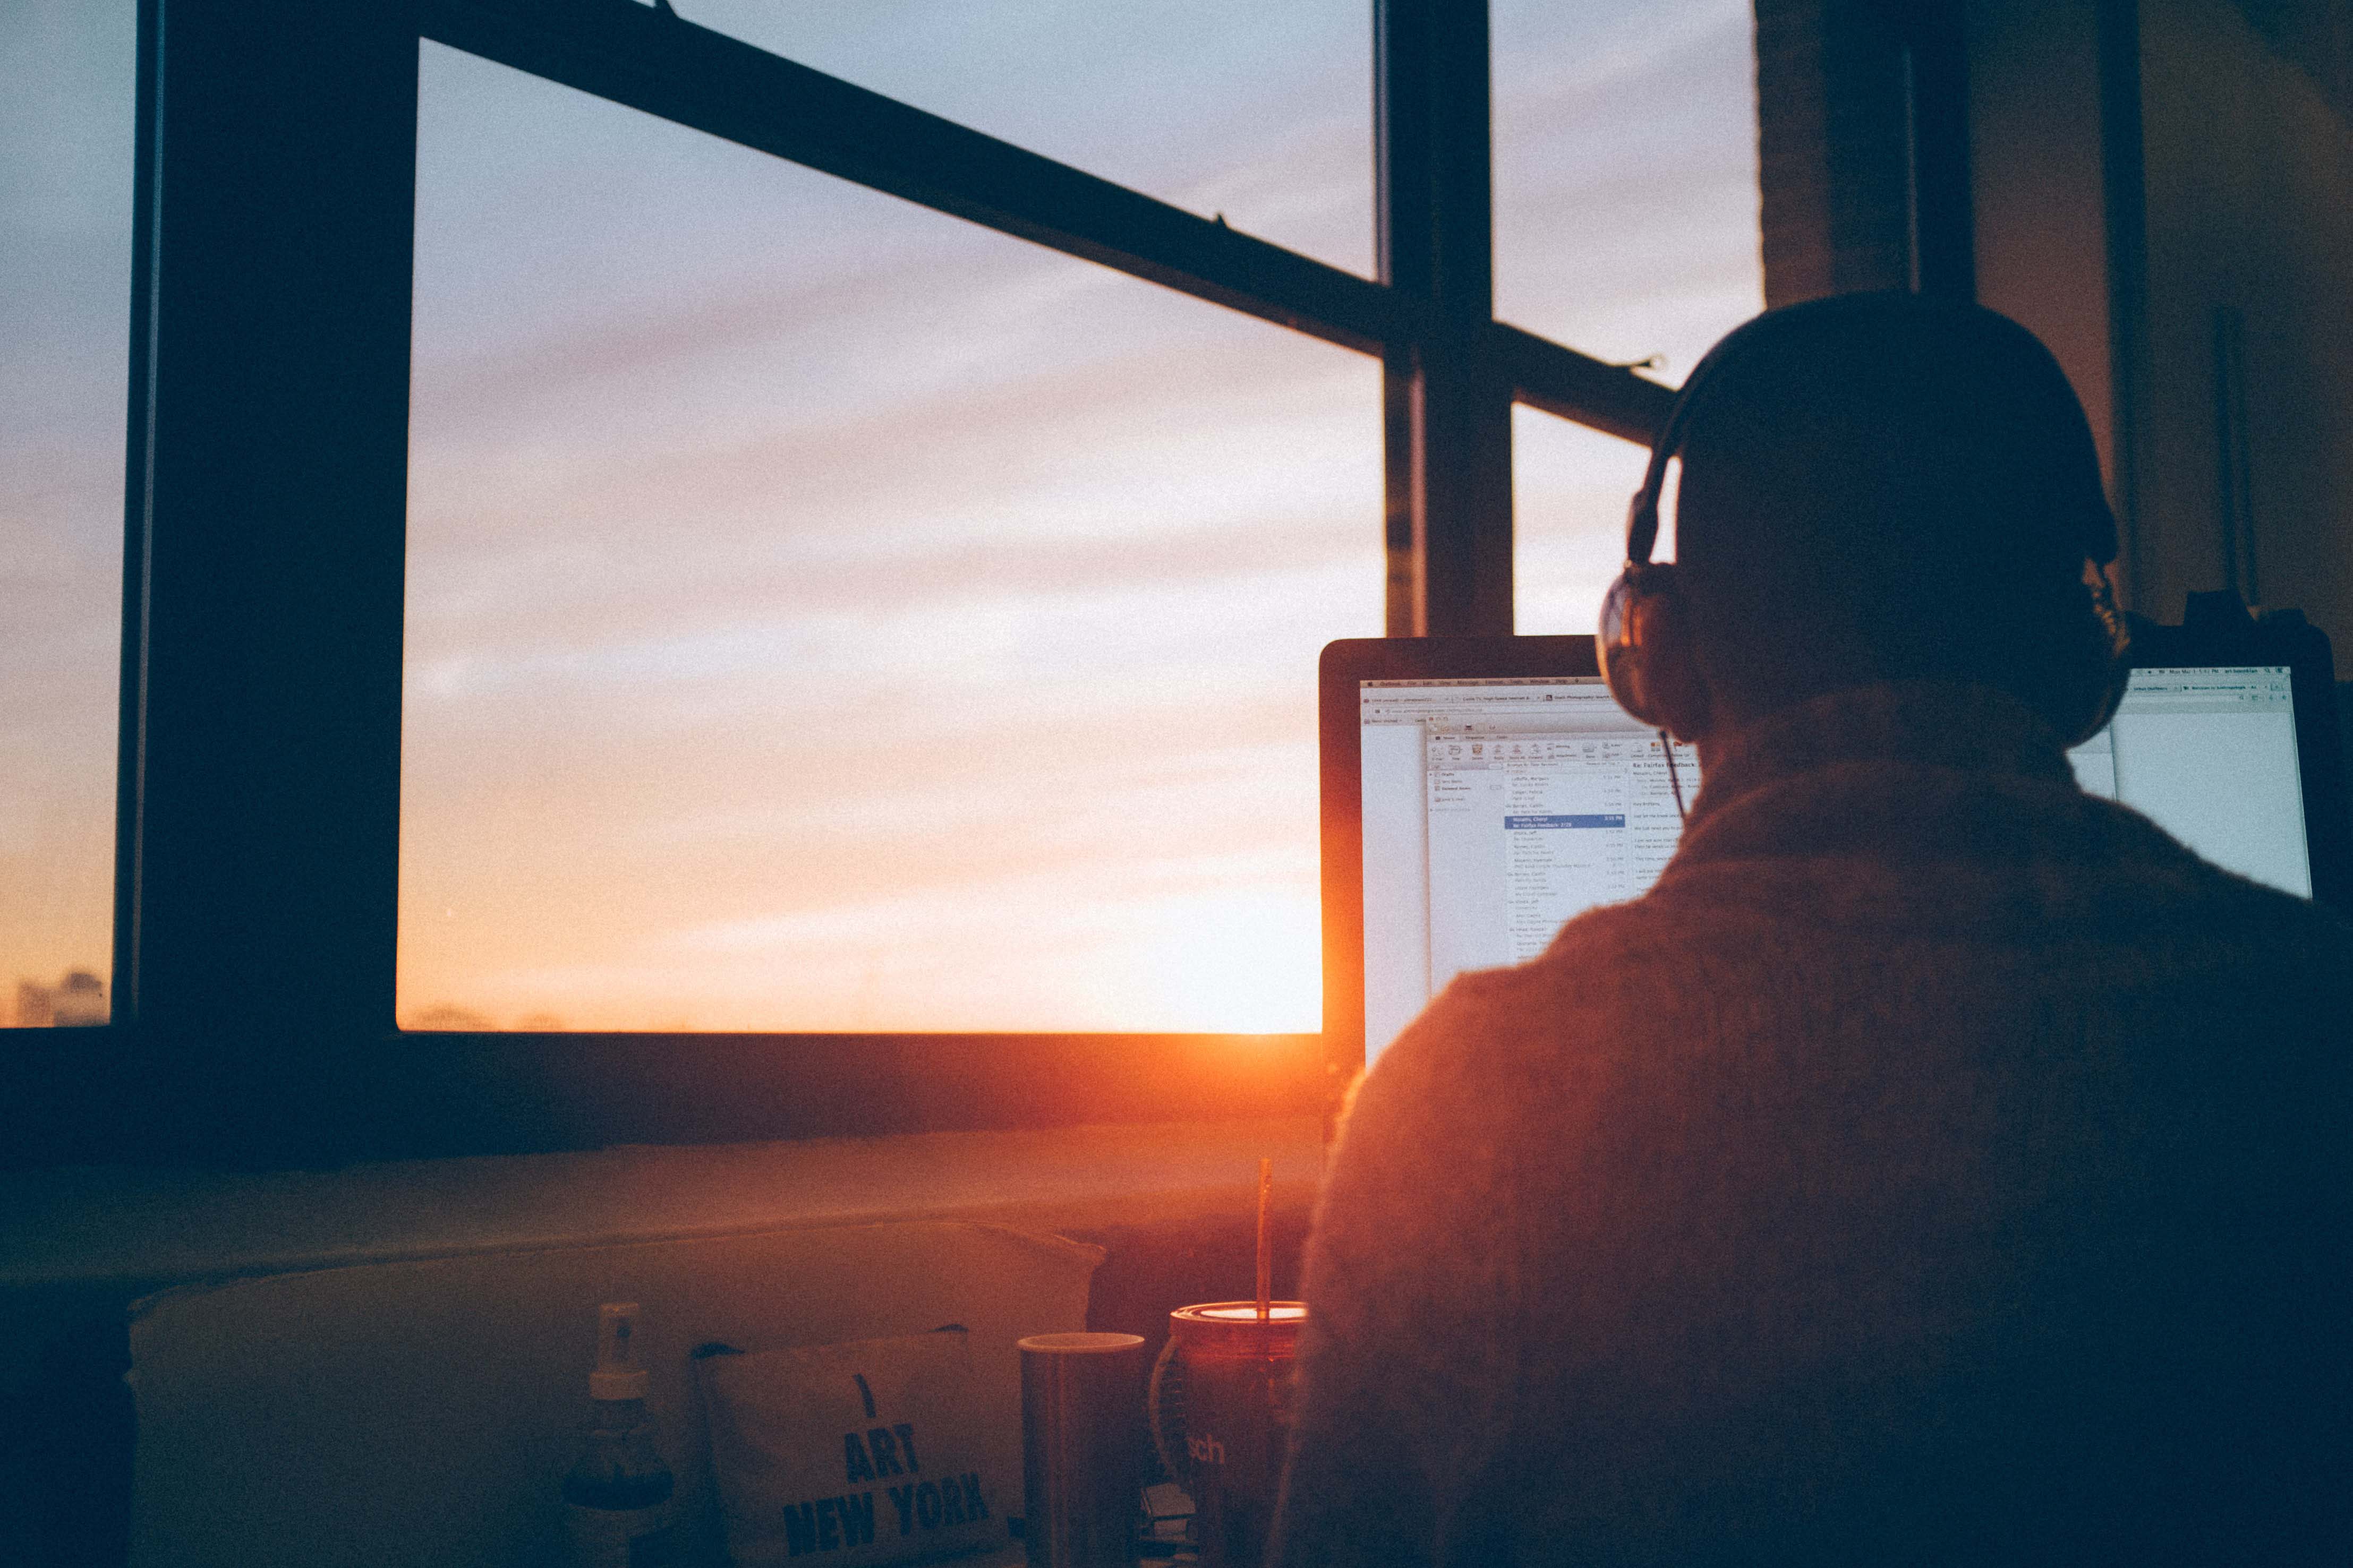 Man wearing headphones sitting in front of a computer with his back to the camera. He is sitting at a window and the sun is setting.